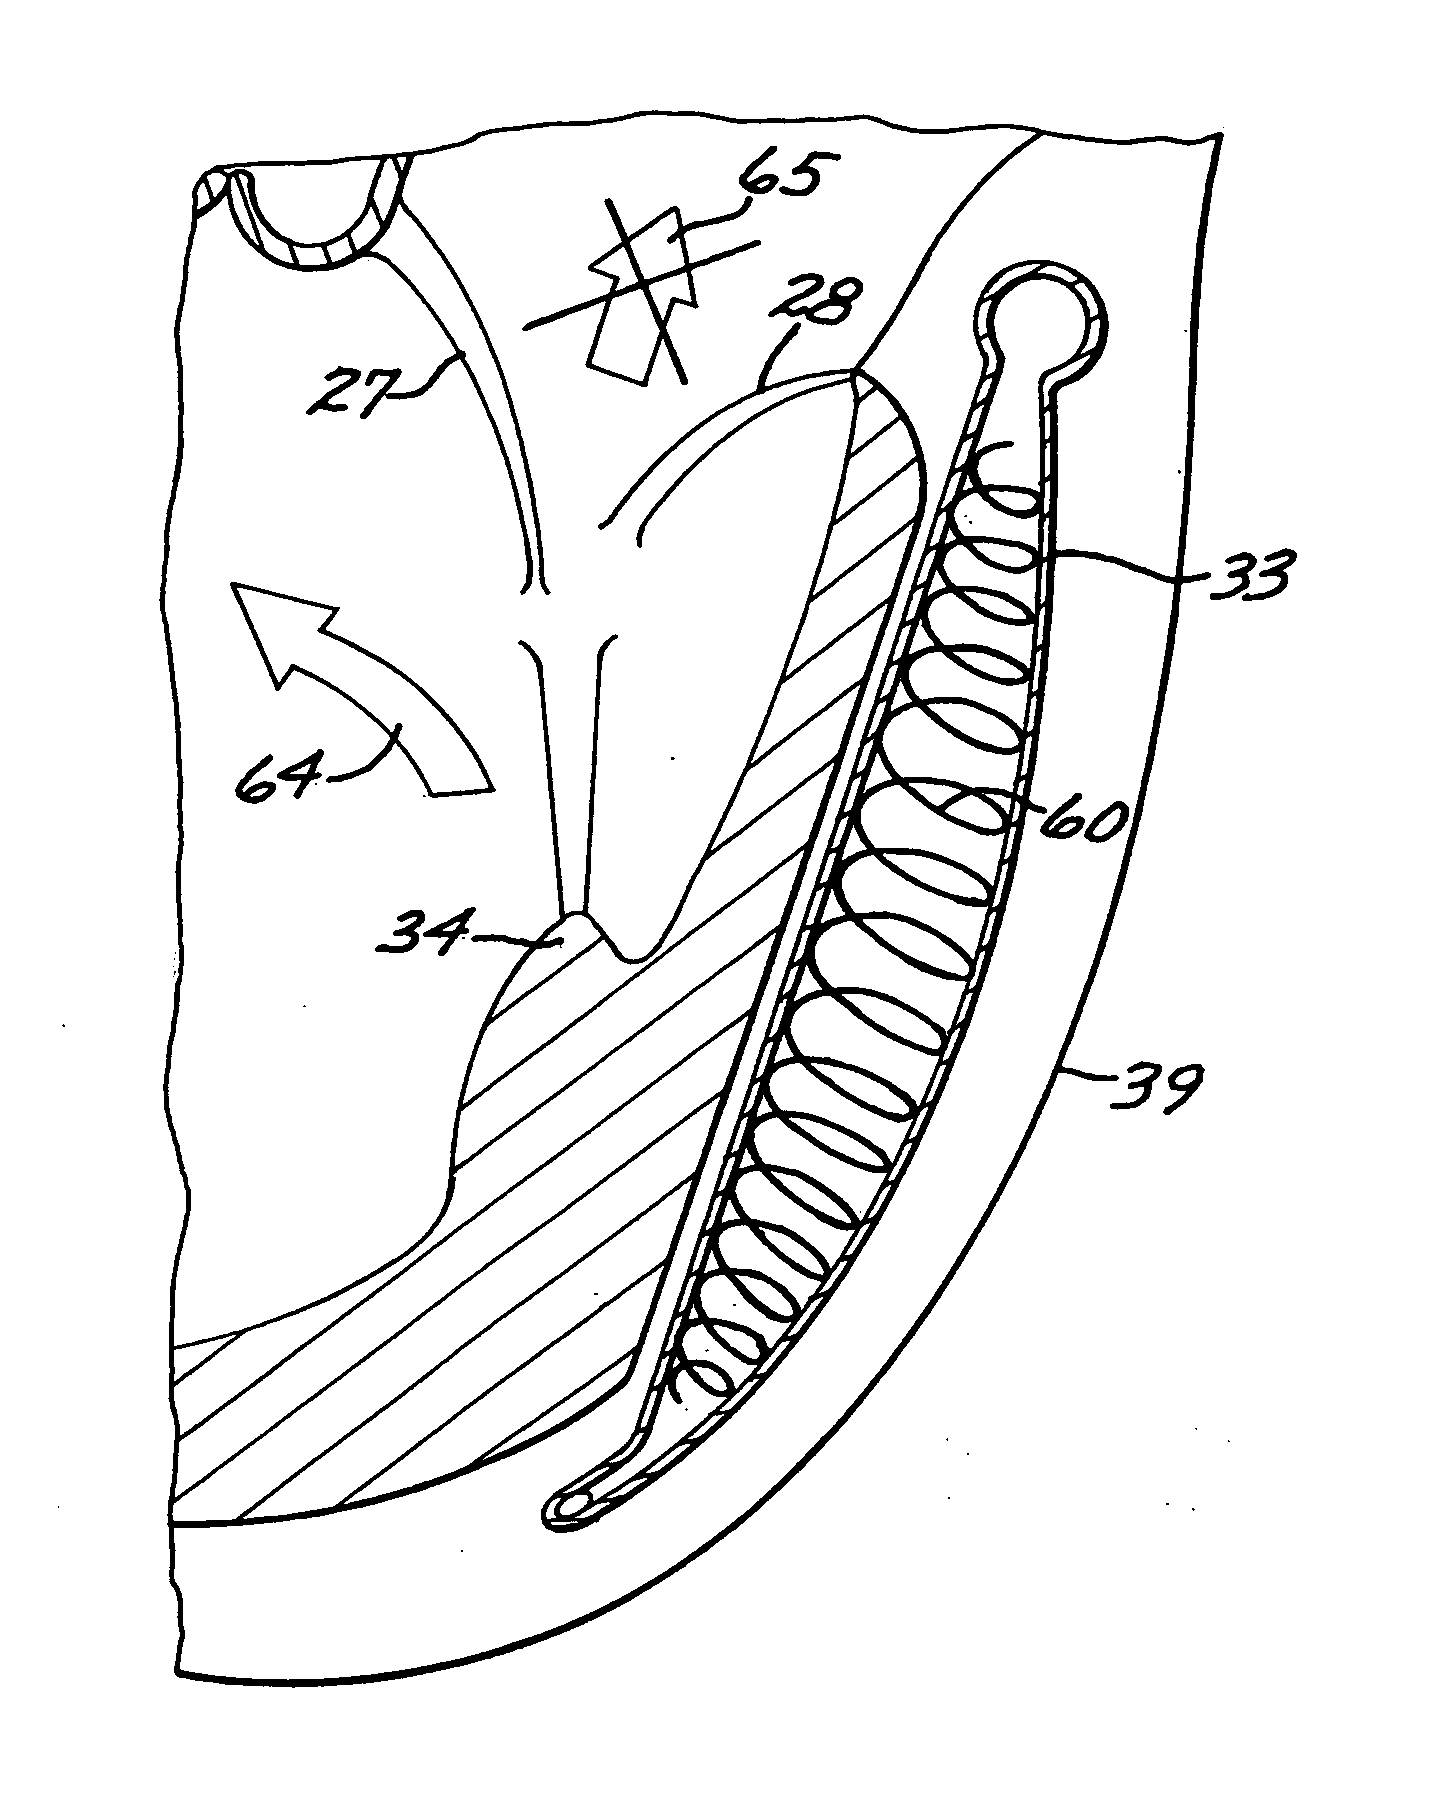 System, including method and apparatus for percutaneous endovascular treatment of functional mitral valve insufficiency